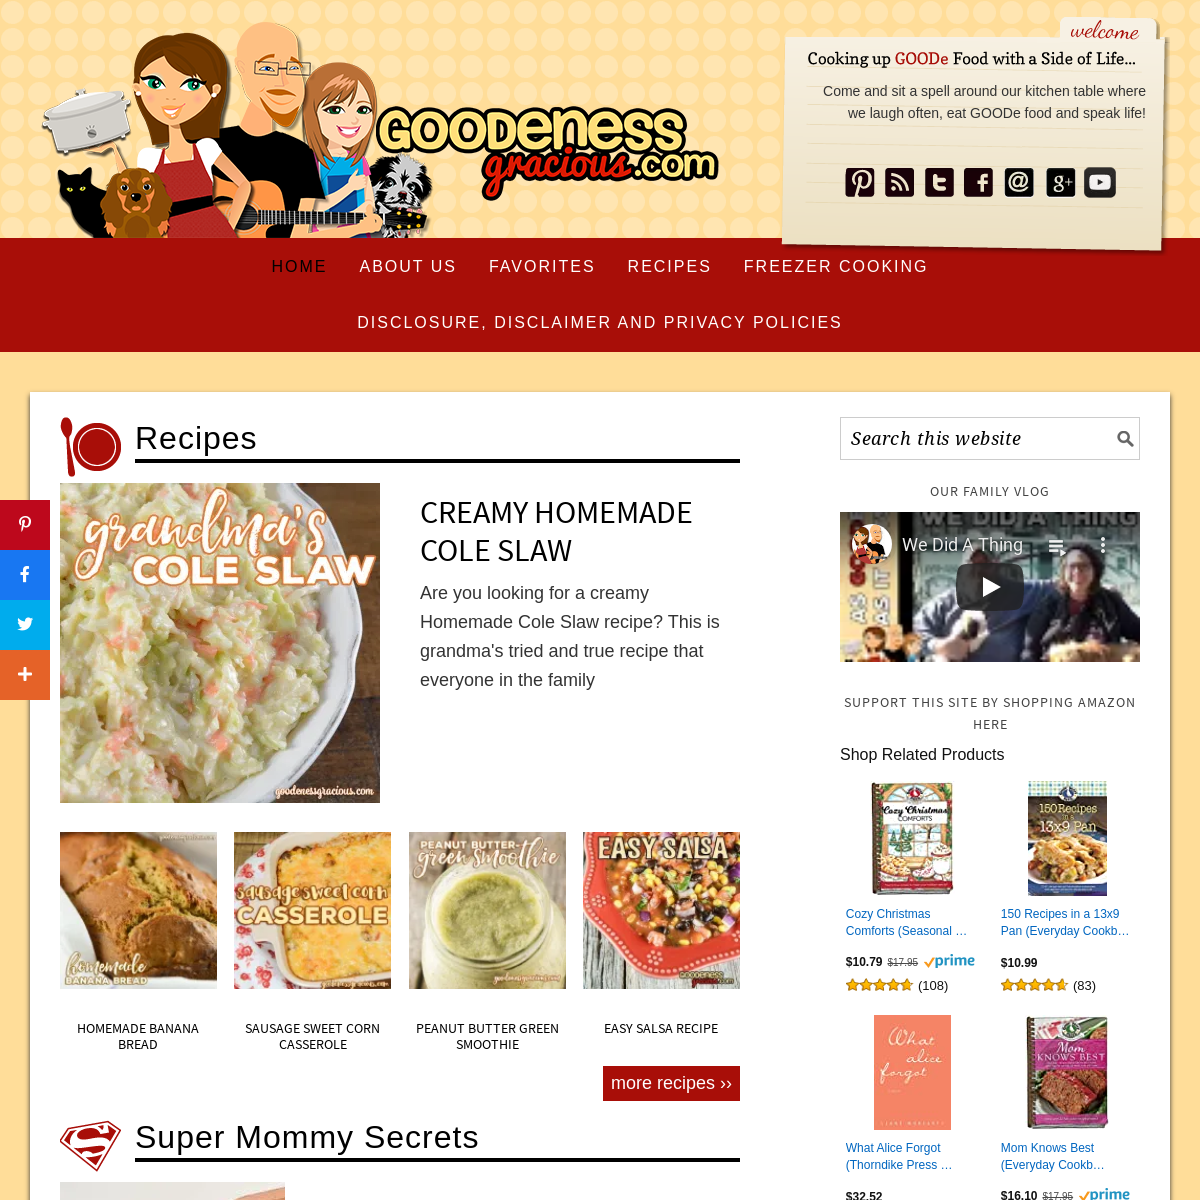 A complete backup of goodenessgracious.com